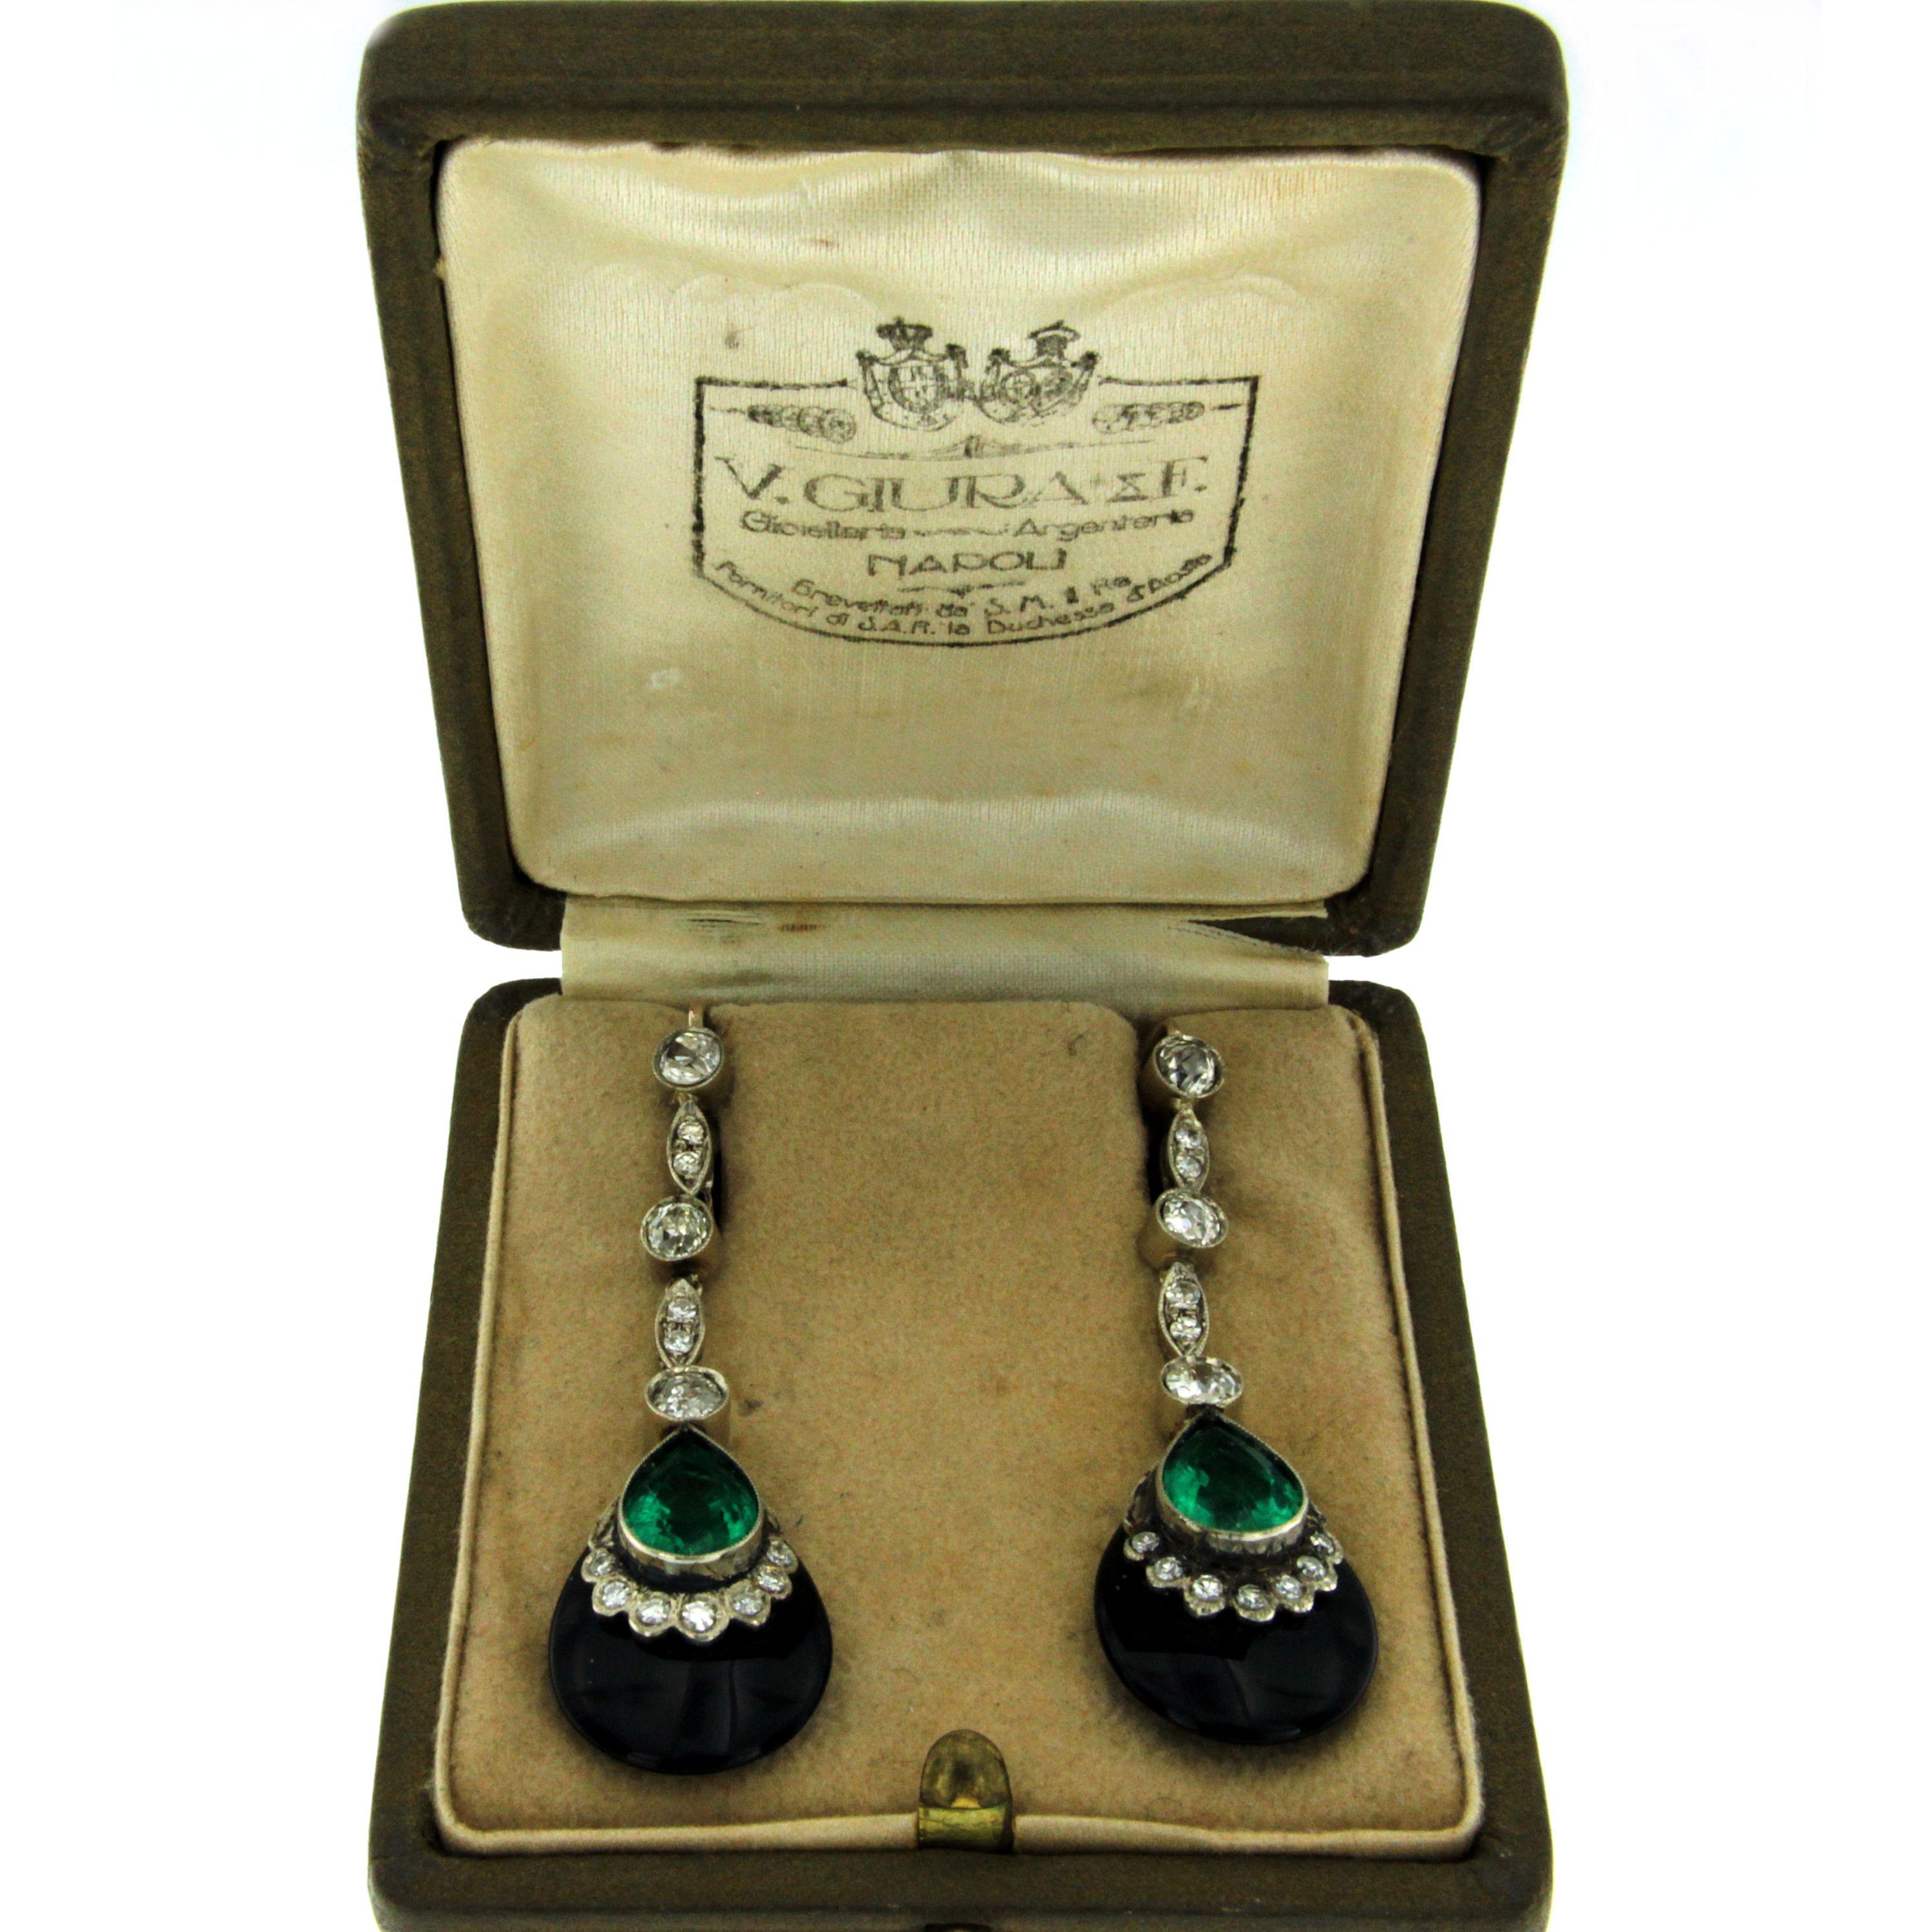 A pair of 18k white gold hand-made pendant earrings, authentic art deco, dated 1930. 
Each earring features a large vivid, drop Emerald Green composite stone, set with 1.50 carats of old mine cut cut diamonds, graded I/J color Vs clarity, in an Onyx